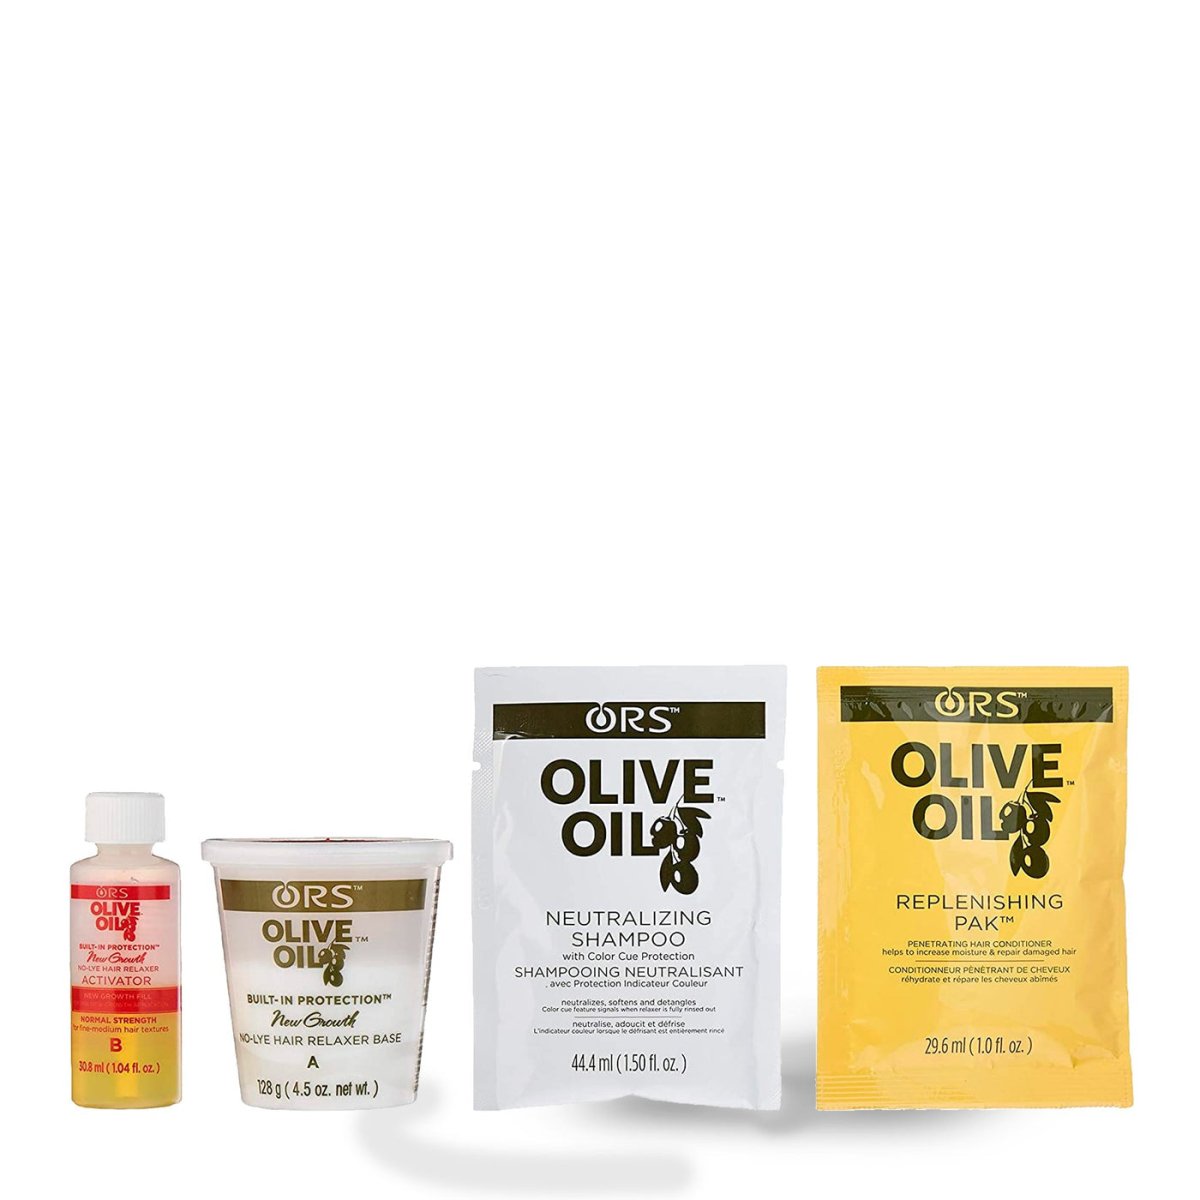 ORS Olive Oil New Growth No-Lye Hair Relaxer - Southwestsix Cosmetics ORS Olive Oil New Growth No-Lye Hair Relaxer Hair Relaxer ORS Southwestsix Cosmetics Extra Strength ORS Olive Oil New Growth No-Lye Hair Relaxer